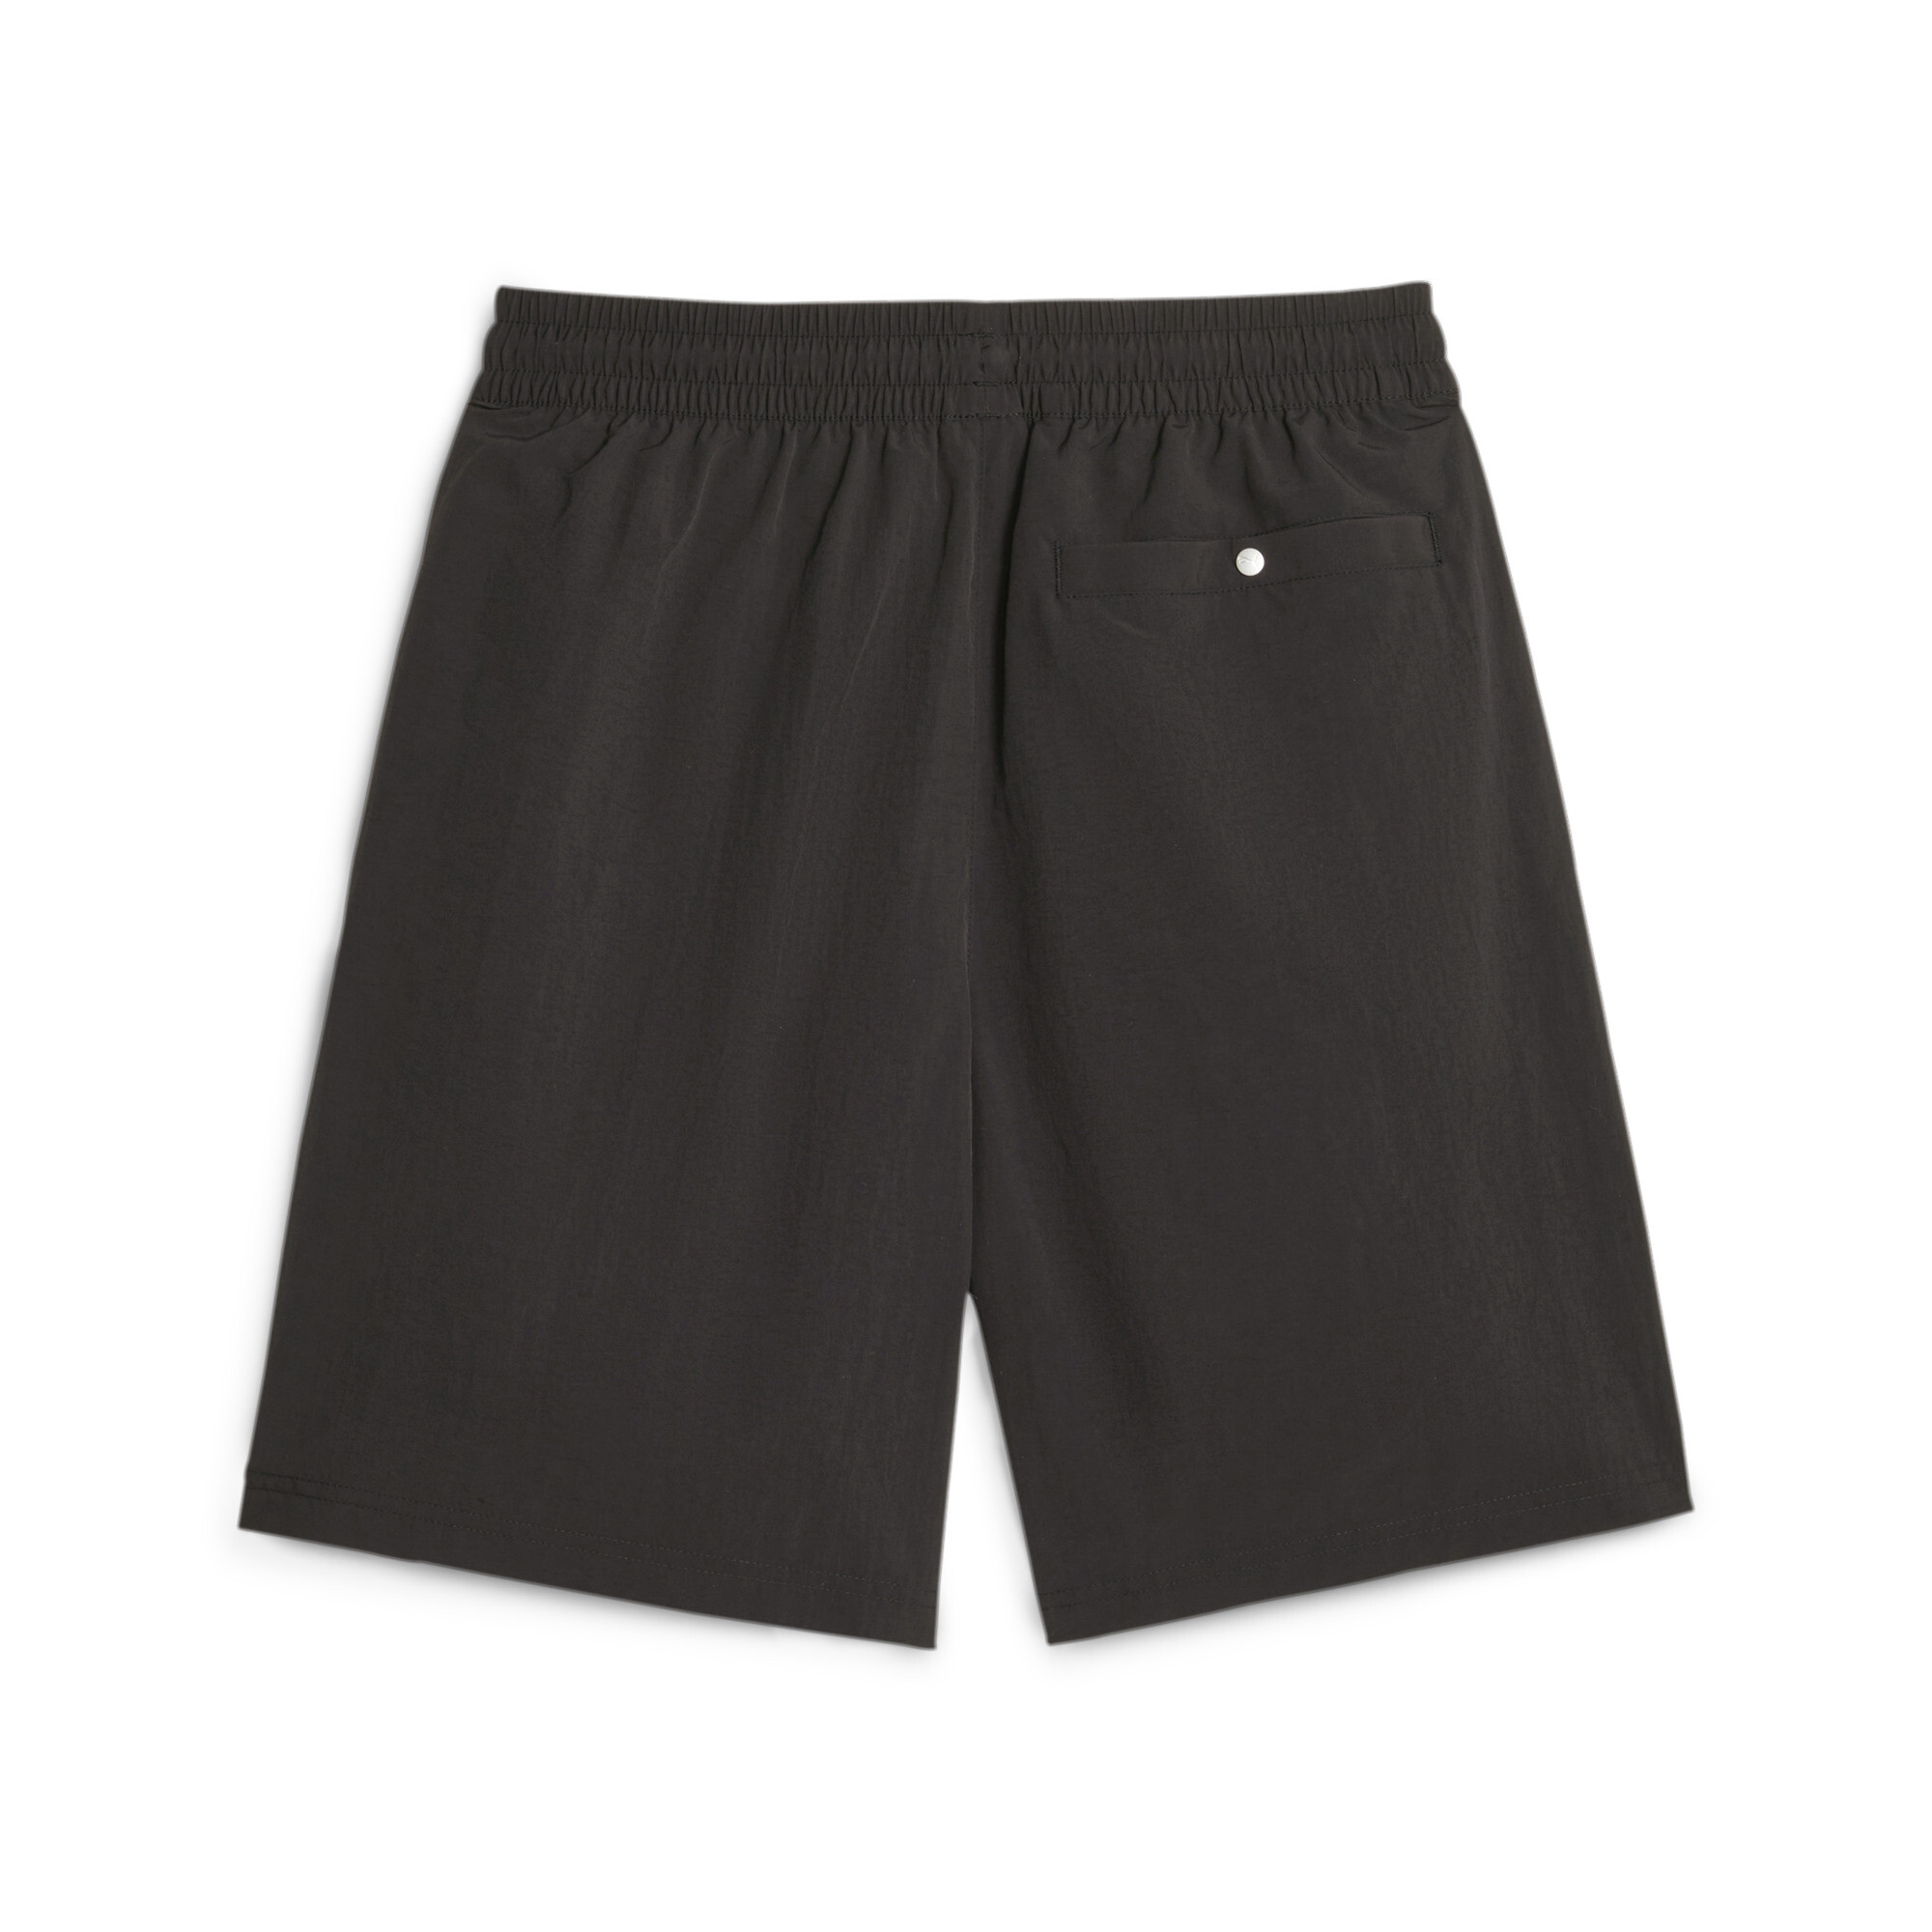 Men's PUMA TEAM Relaxed Shorts In Black, Size Small